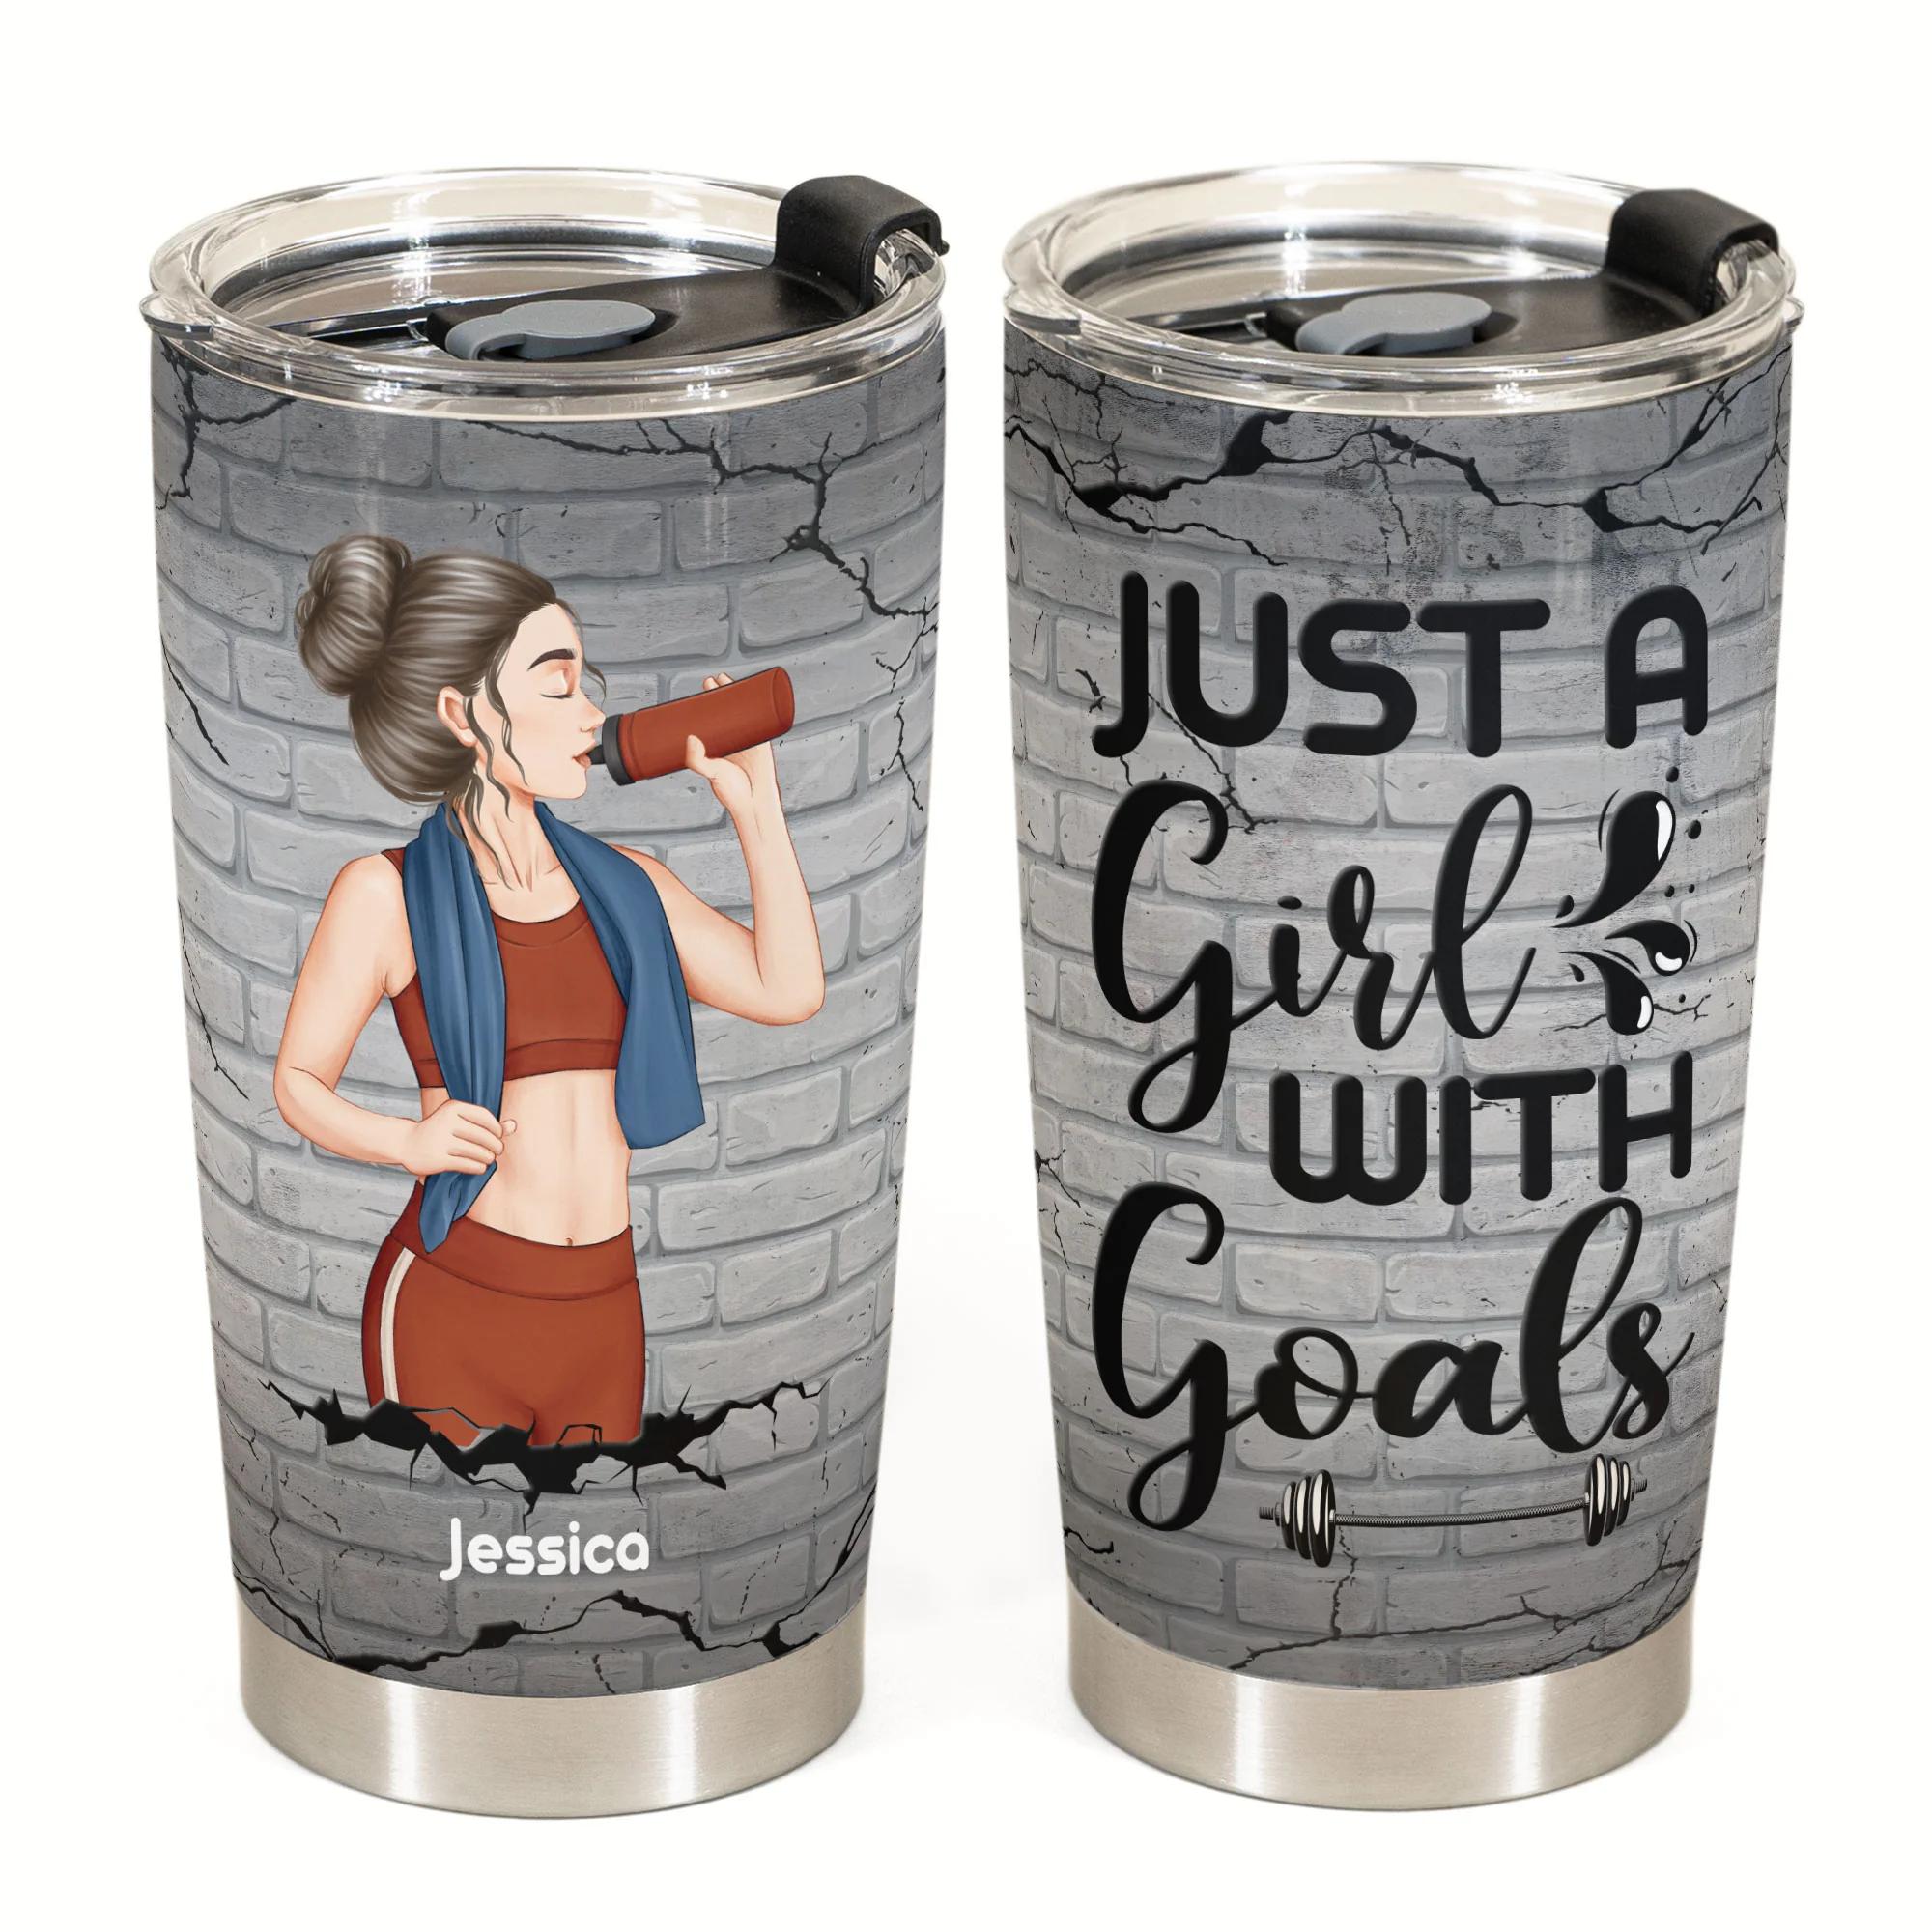 Gym Mug Customized A Girl With Goals - PERSONAL84